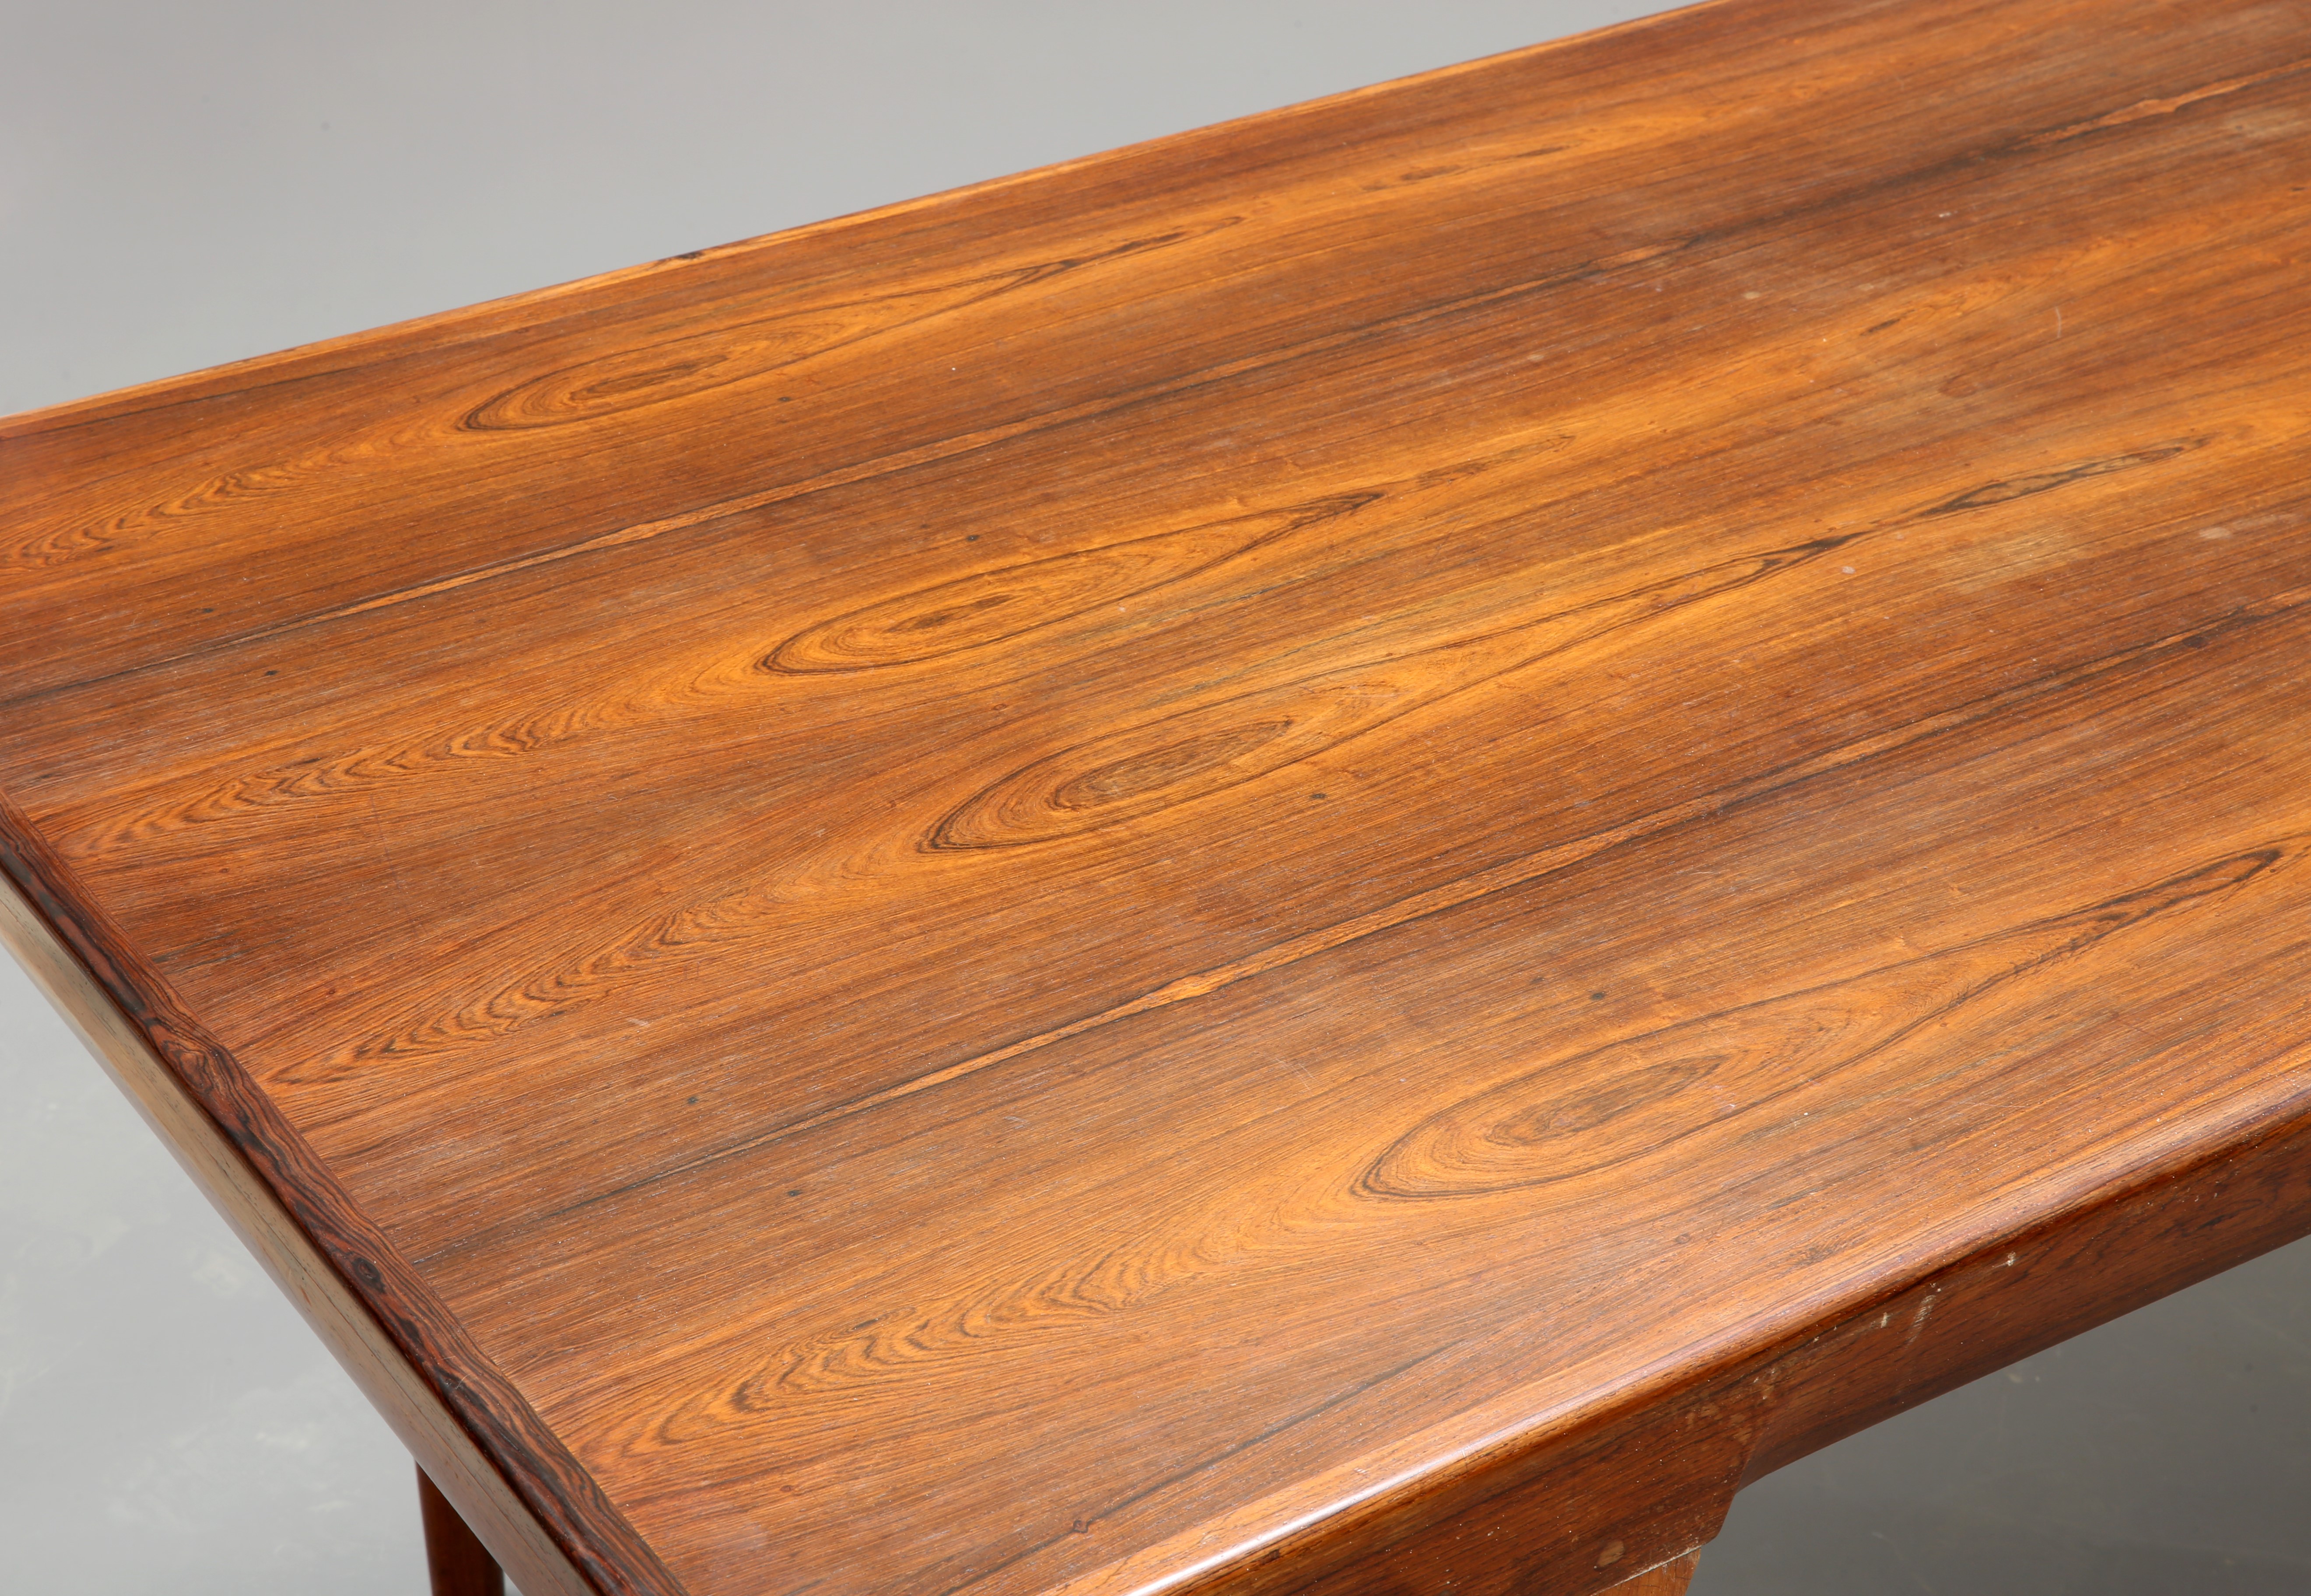 A DANISH ROSEWOOD EXTENDING DINING TABLE AND THREE CHAIRS - Image 3 of 3